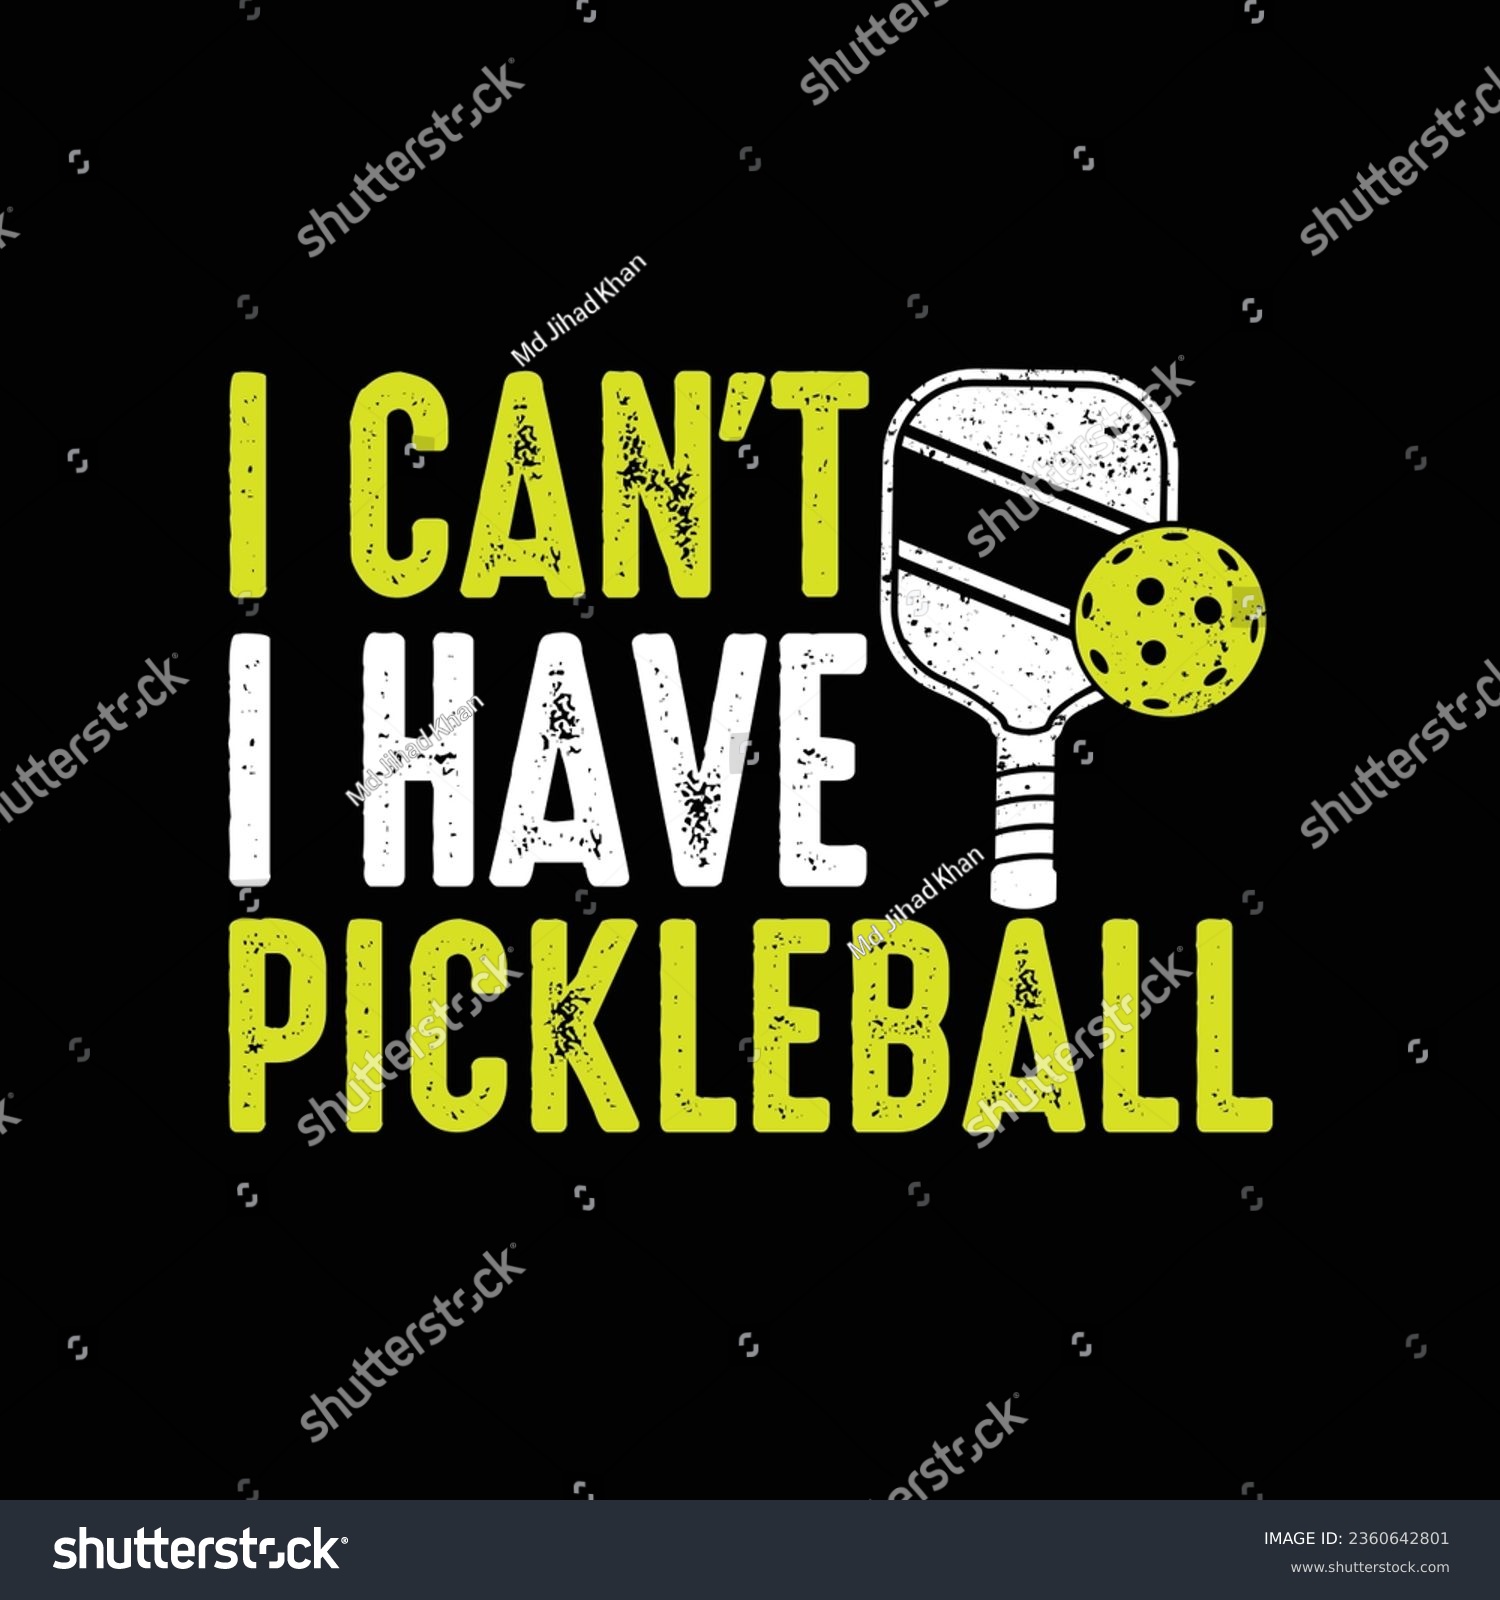 SVG of I Can't I Have Pickleball- Pickball T-Shirt Design, Posters, Greeting Cards, Textiles, and Sticker Vector Illustration svg